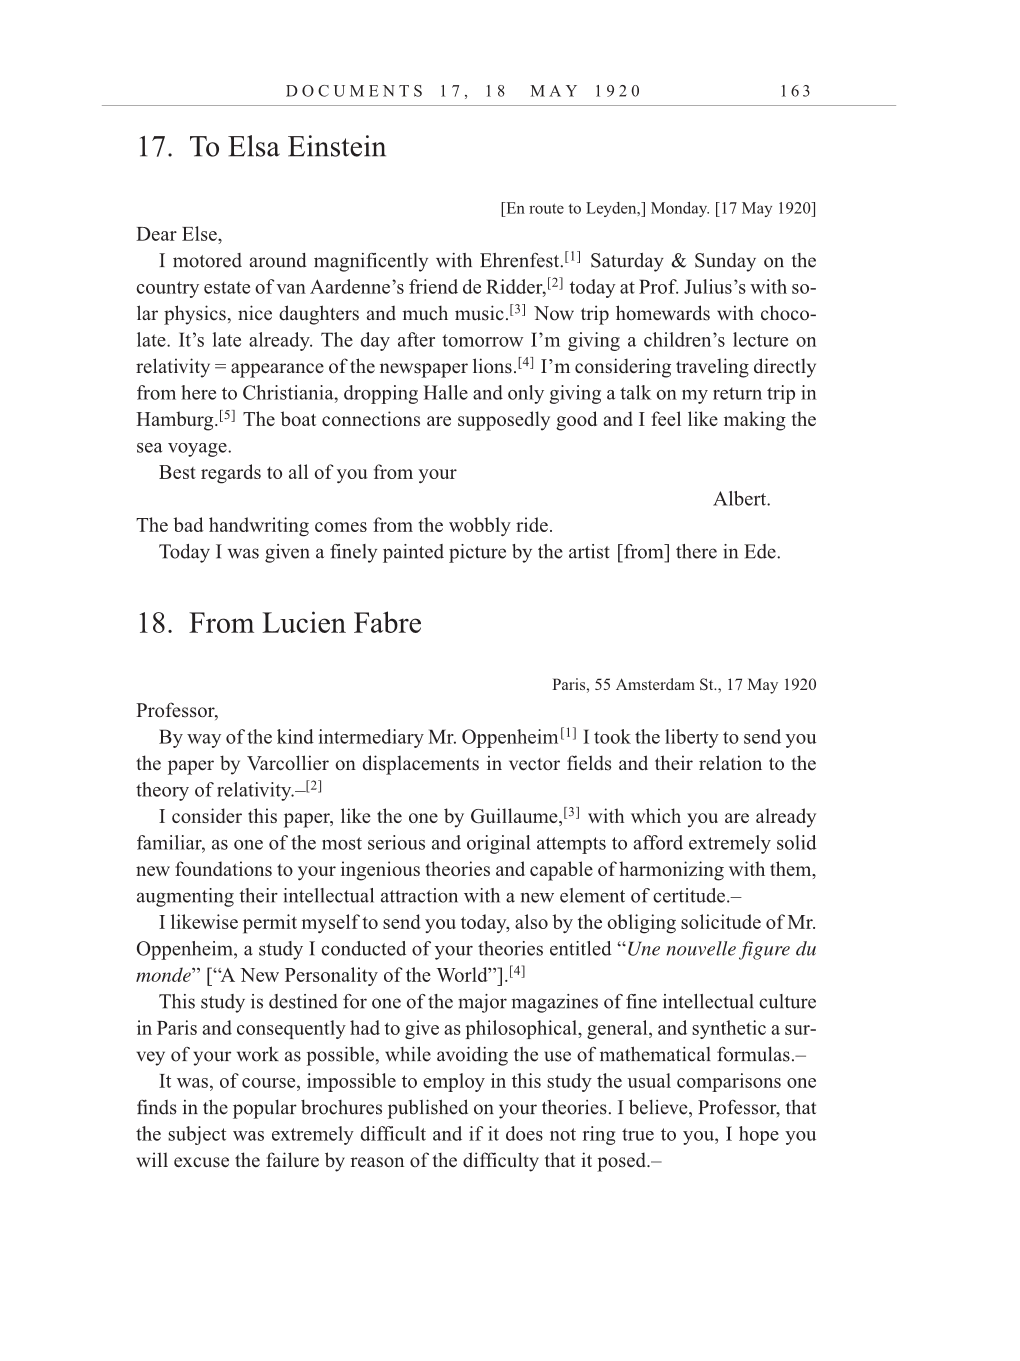 Volume 10: The Berlin Years: Correspondence, May-December 1920, and Supplementary Correspondence, 1909-1920 (English translation supplement) page 163